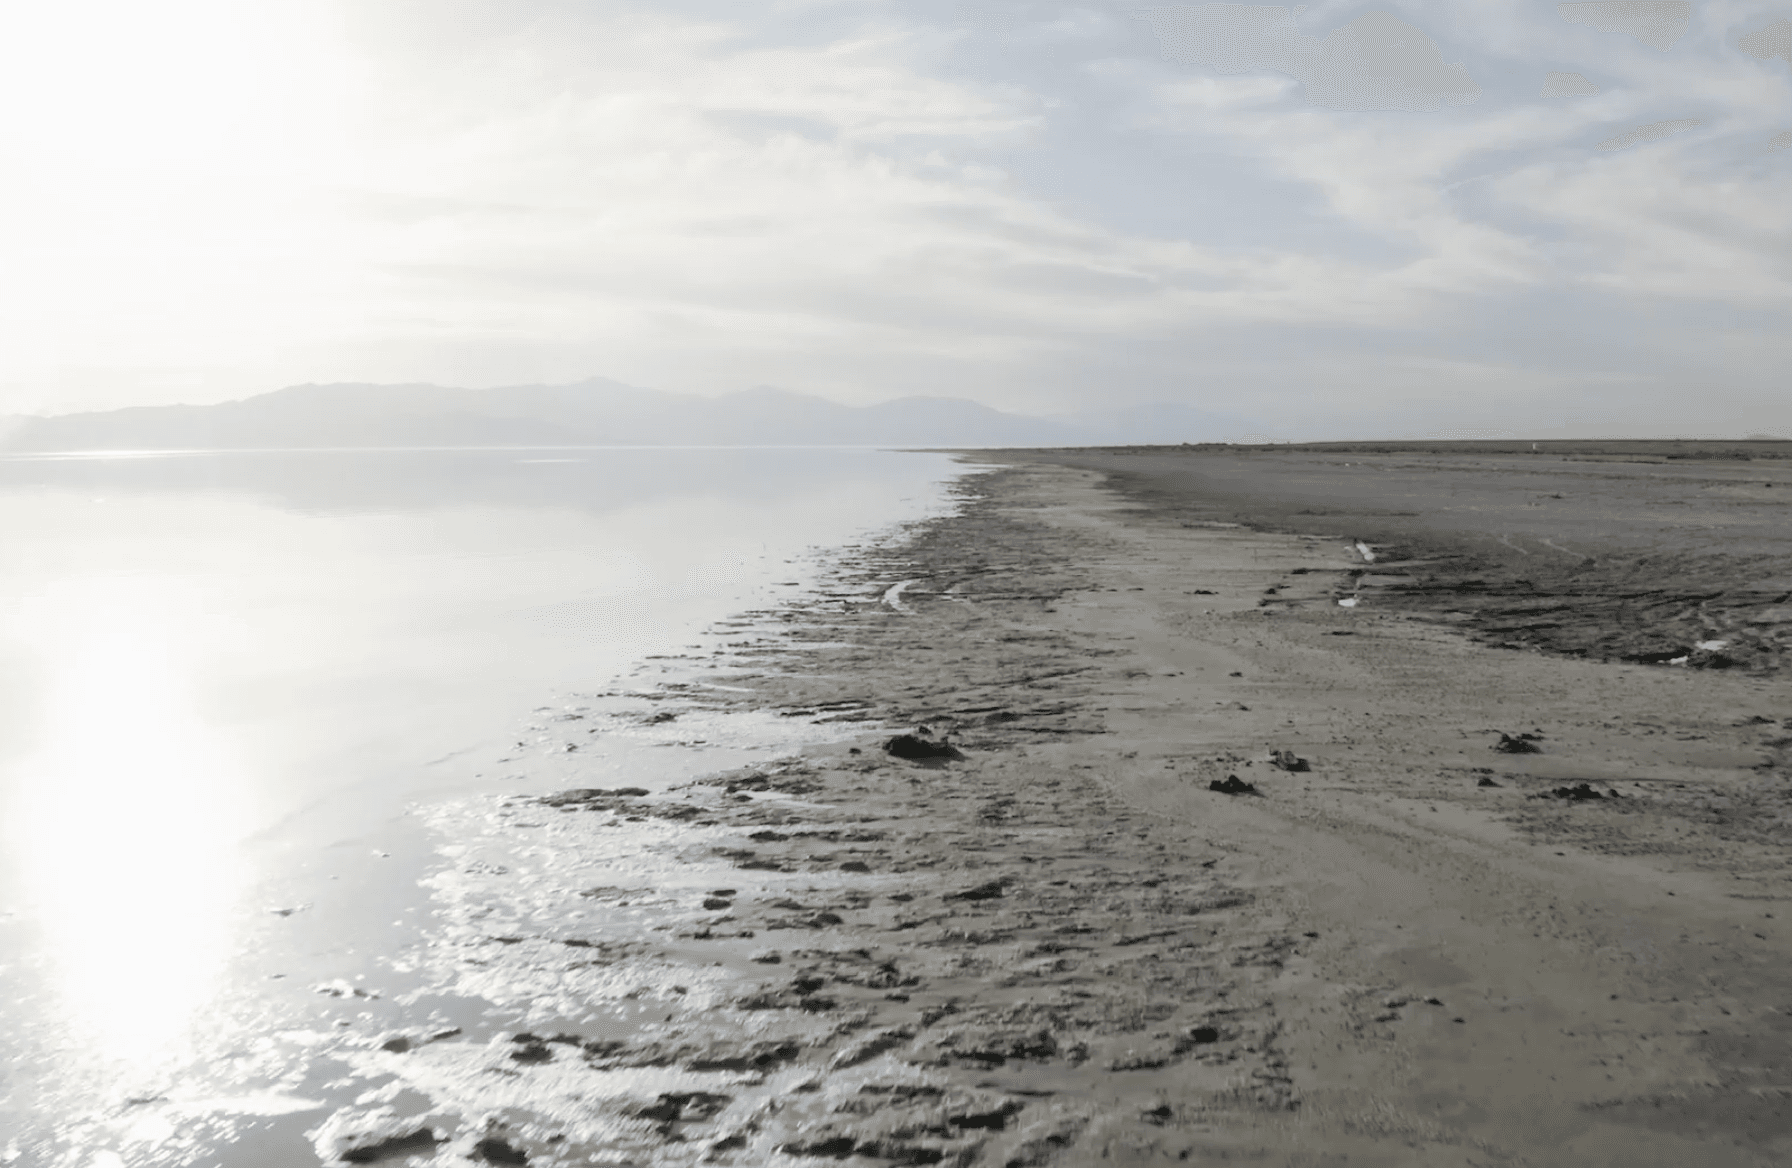 Nearly 12 Acres of Possibilities Await Near the Salton Sea in Southern California!